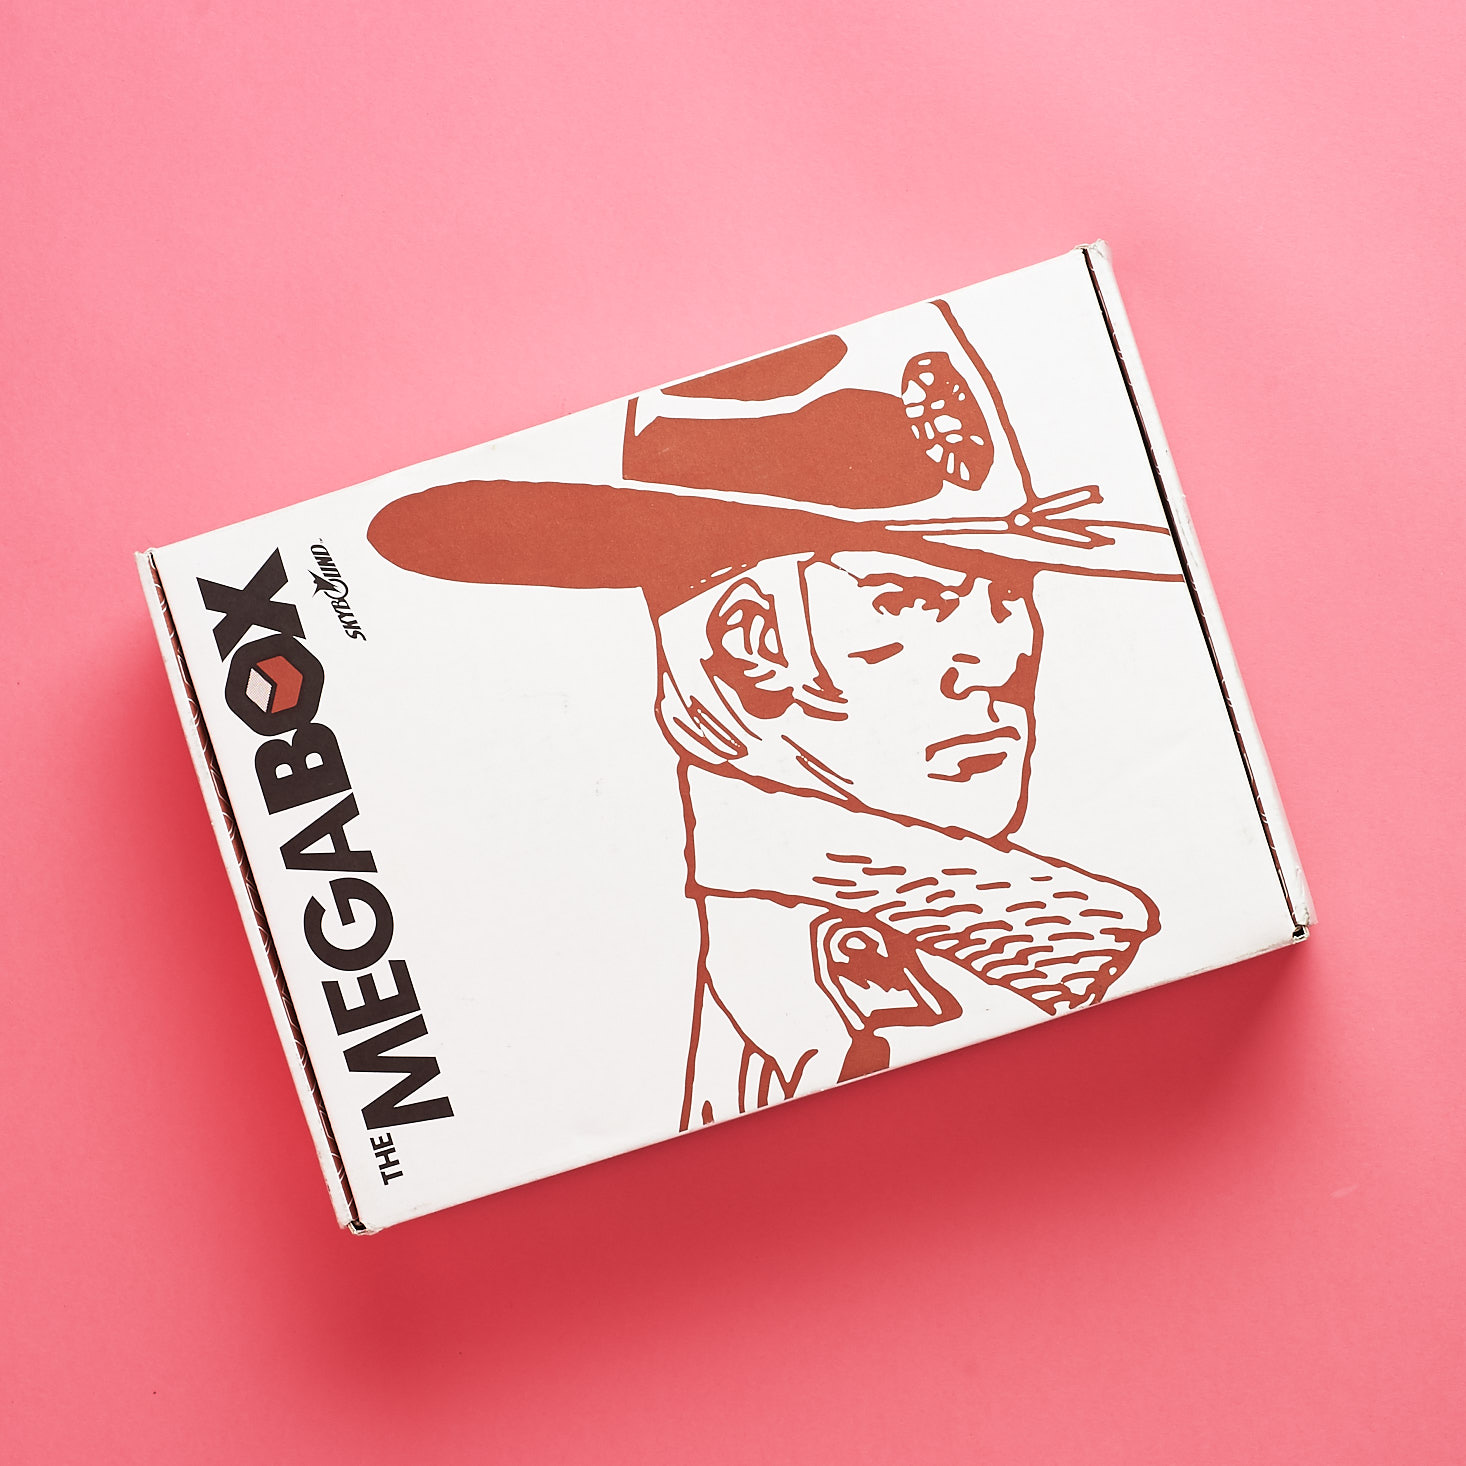 Skybound Megabox Subscription Box Review – Fall 2018